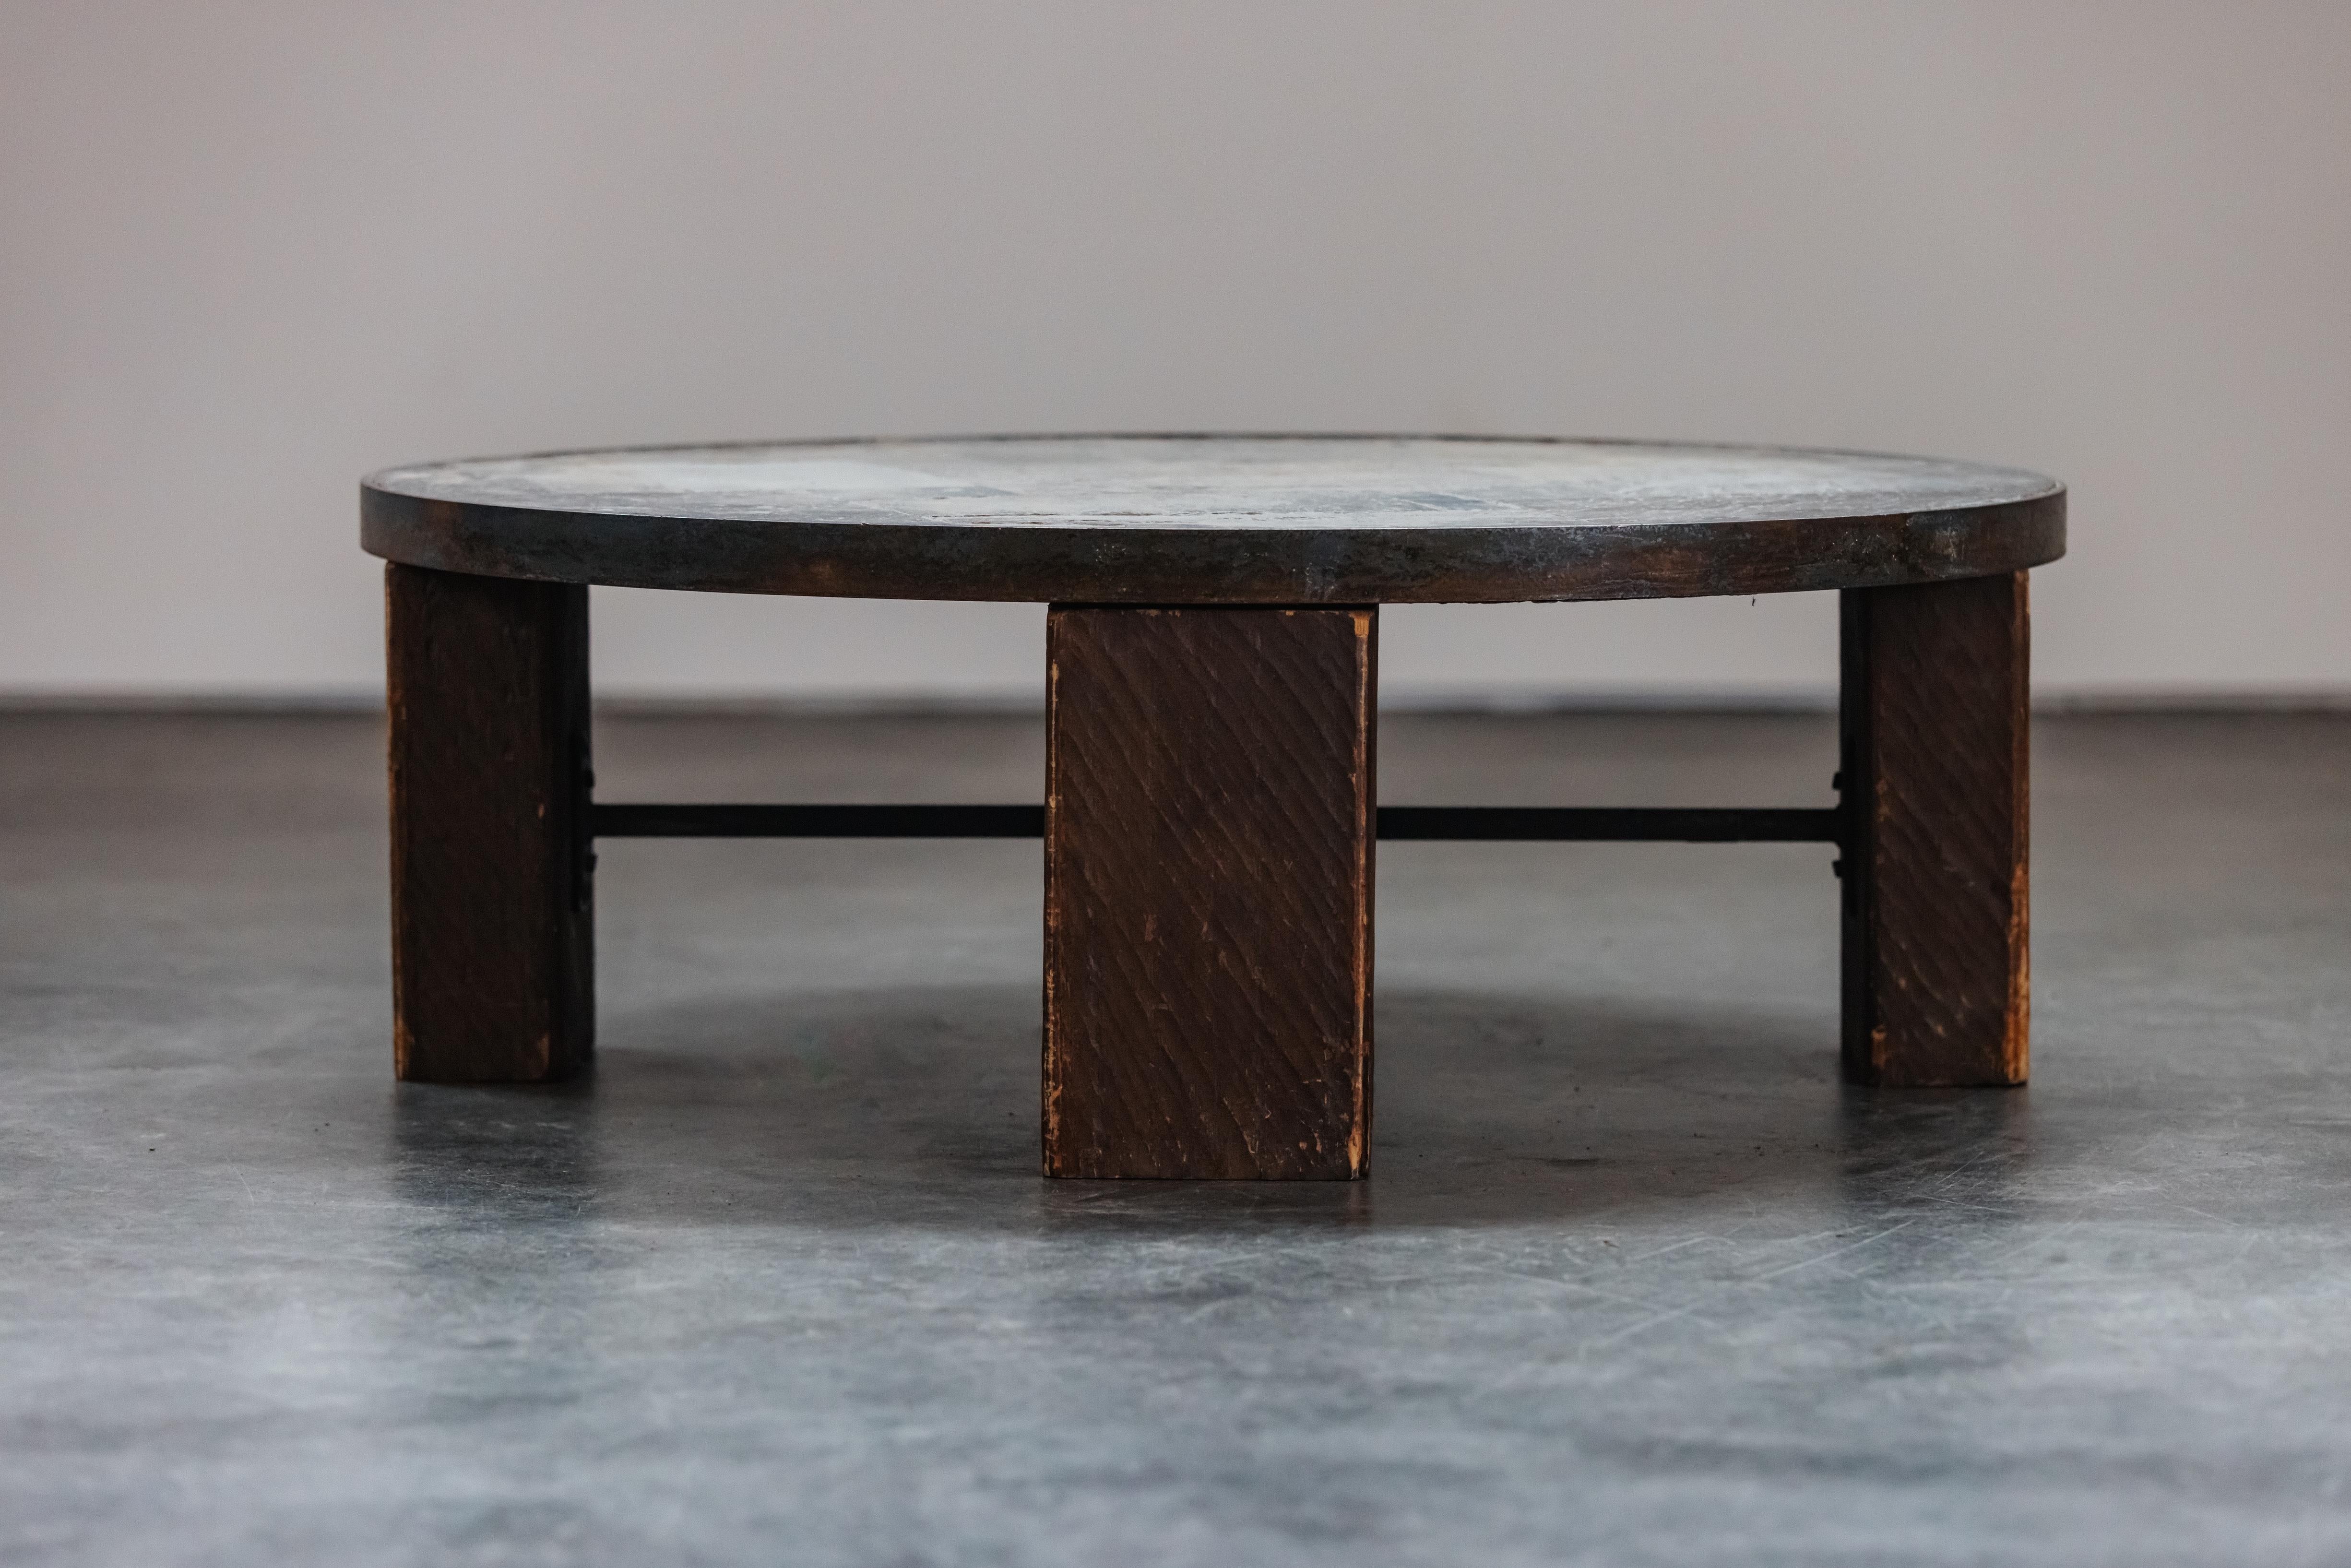 Vintage Stone And Oak Coffee Table From France, Circa 1960.  Stone top comprised of inset slate tiles.  Two pieces.  Light wear and use.